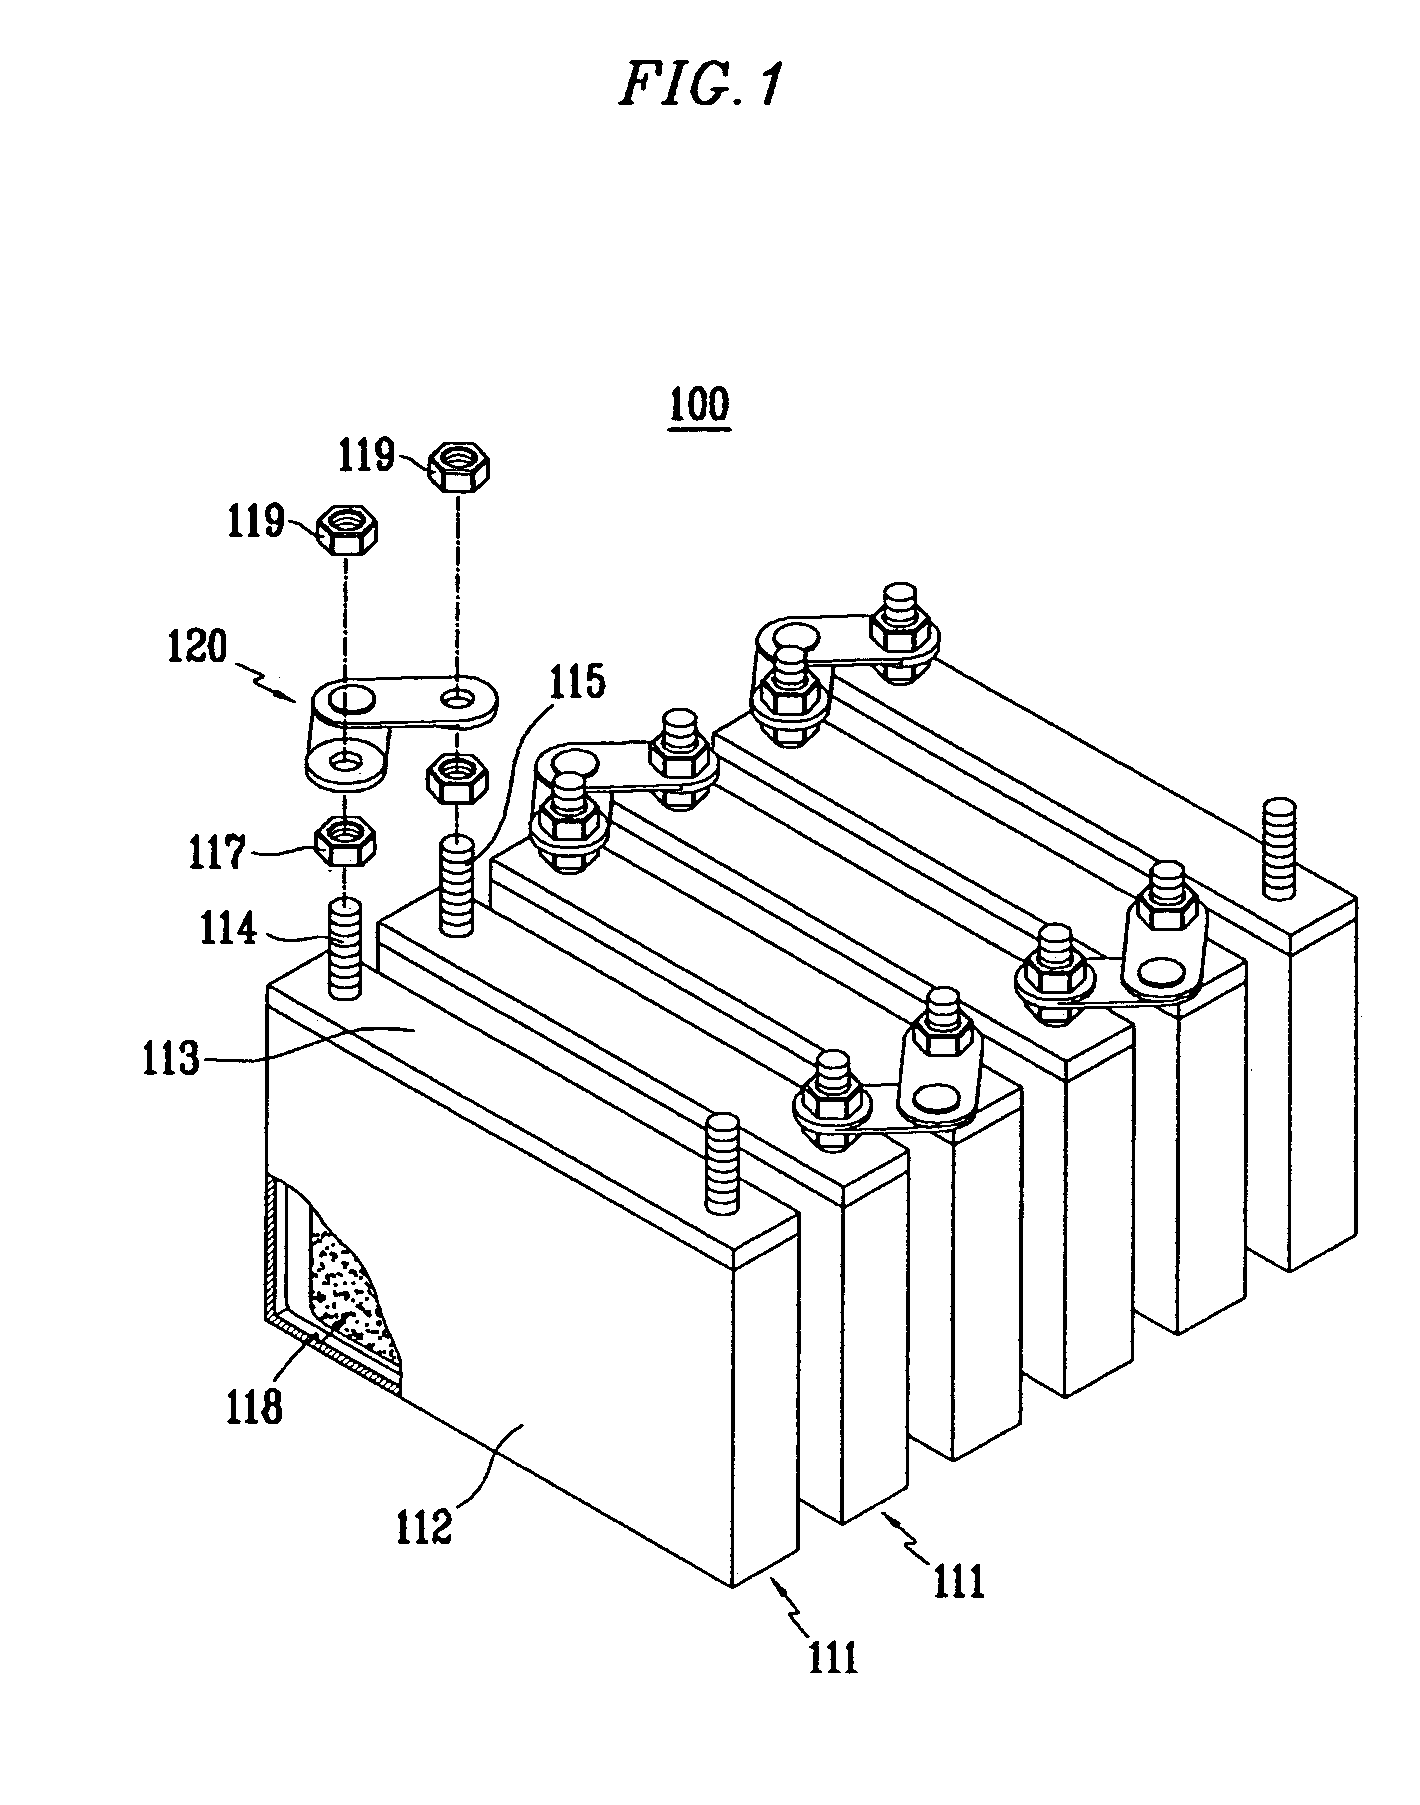 Modular battery with connector interconnecting terminals of adjacent unit cells